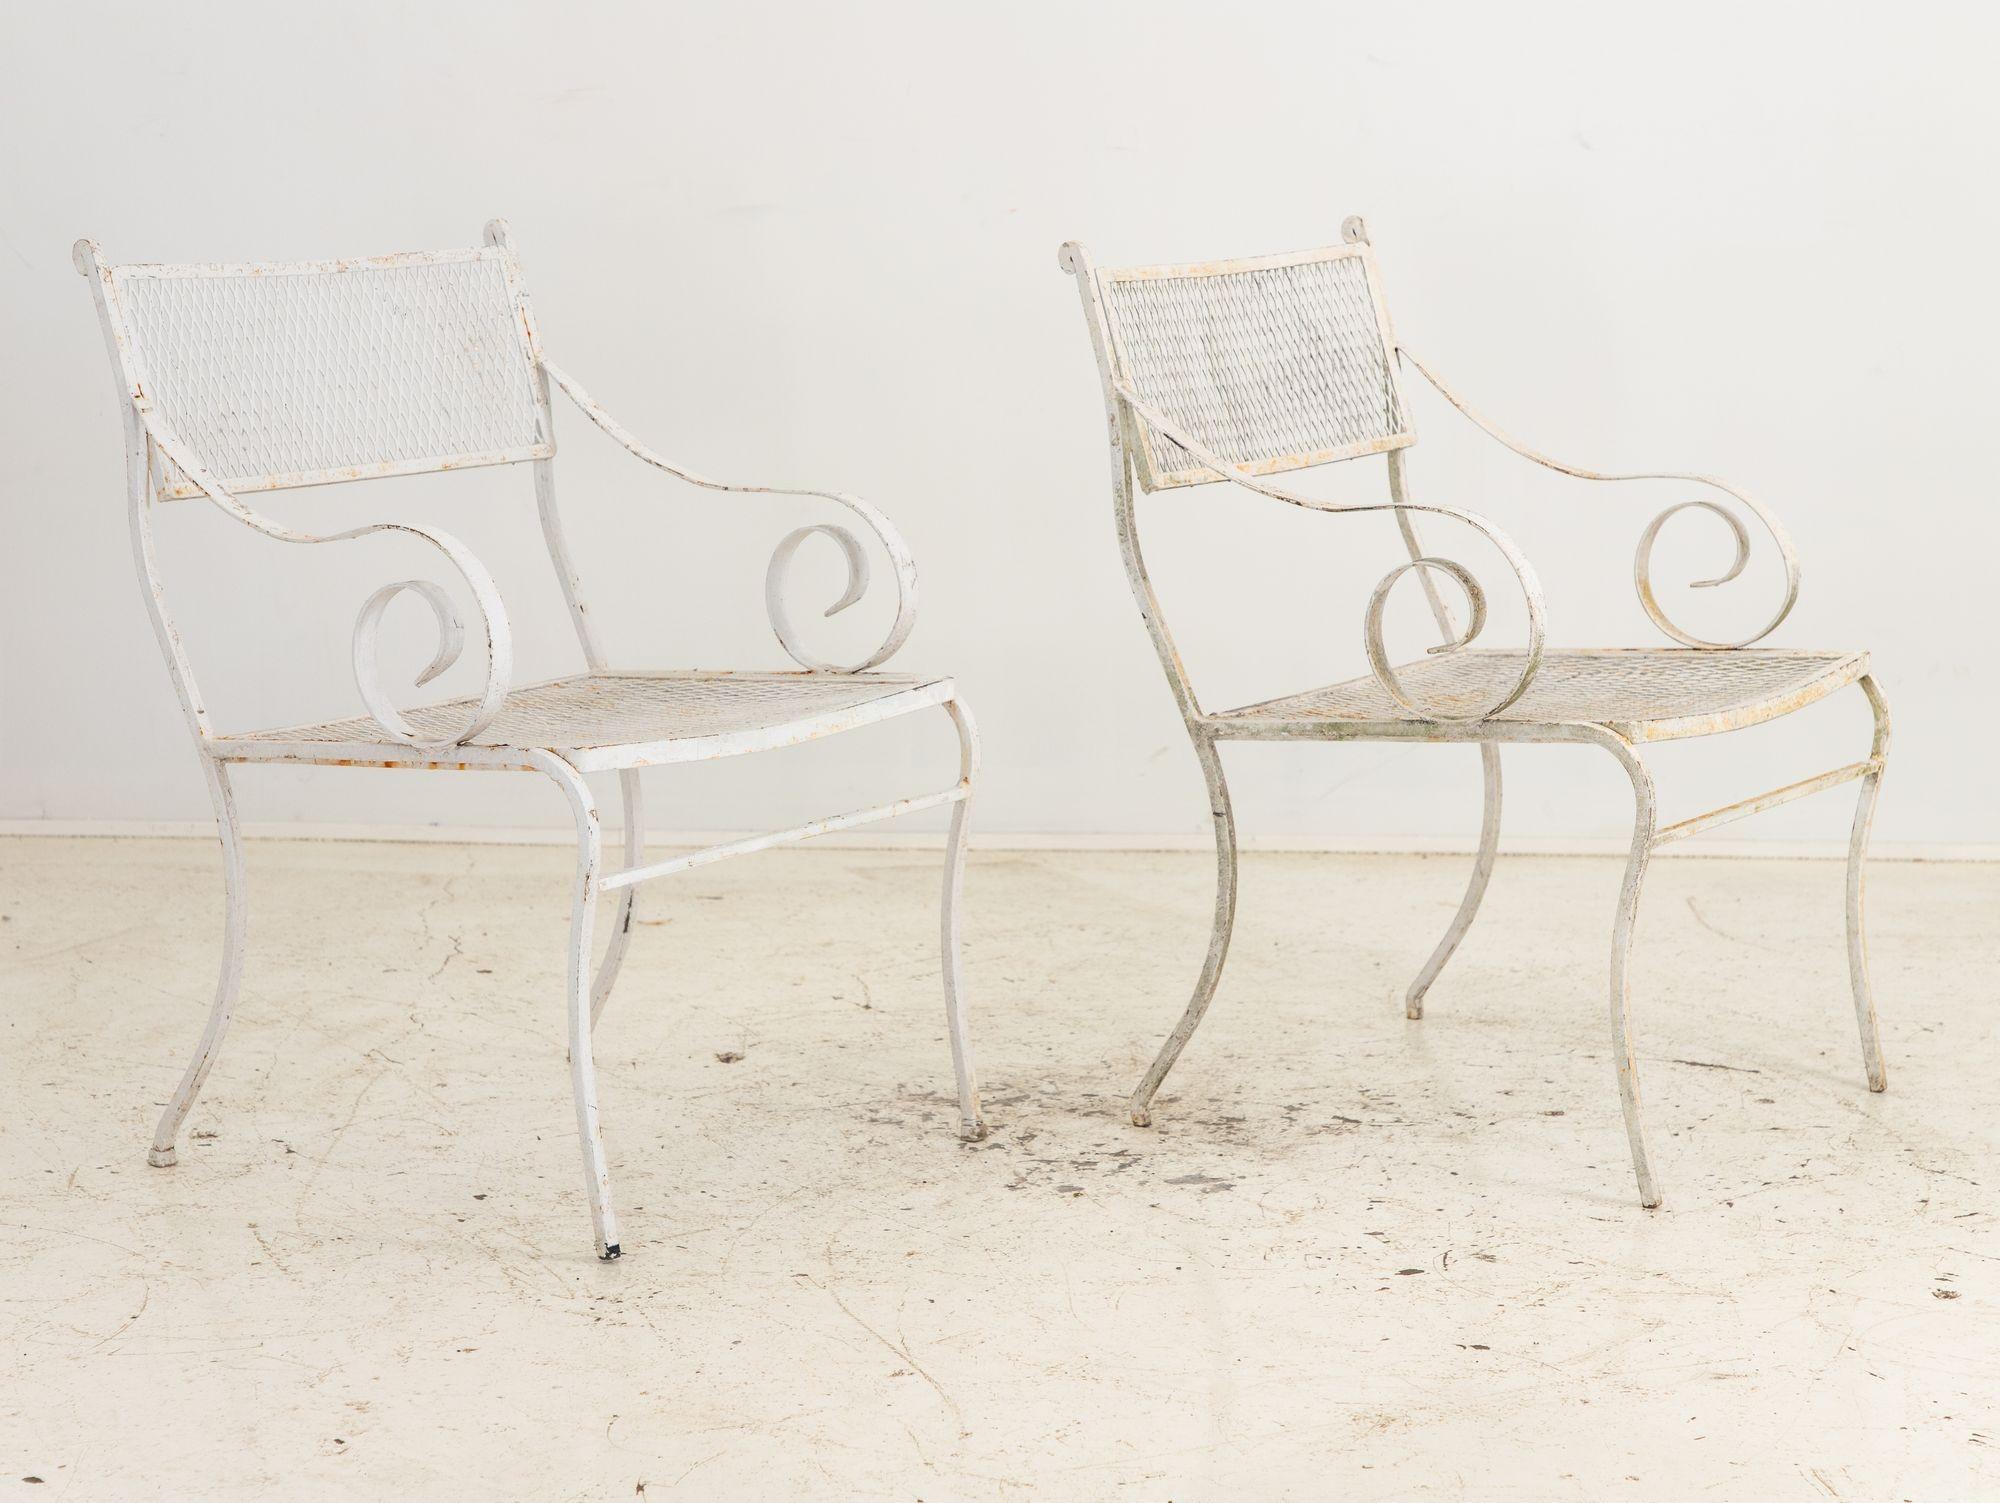 Pair White Painted Metal Garden Chairs, American mid 20th Century For Sale 1